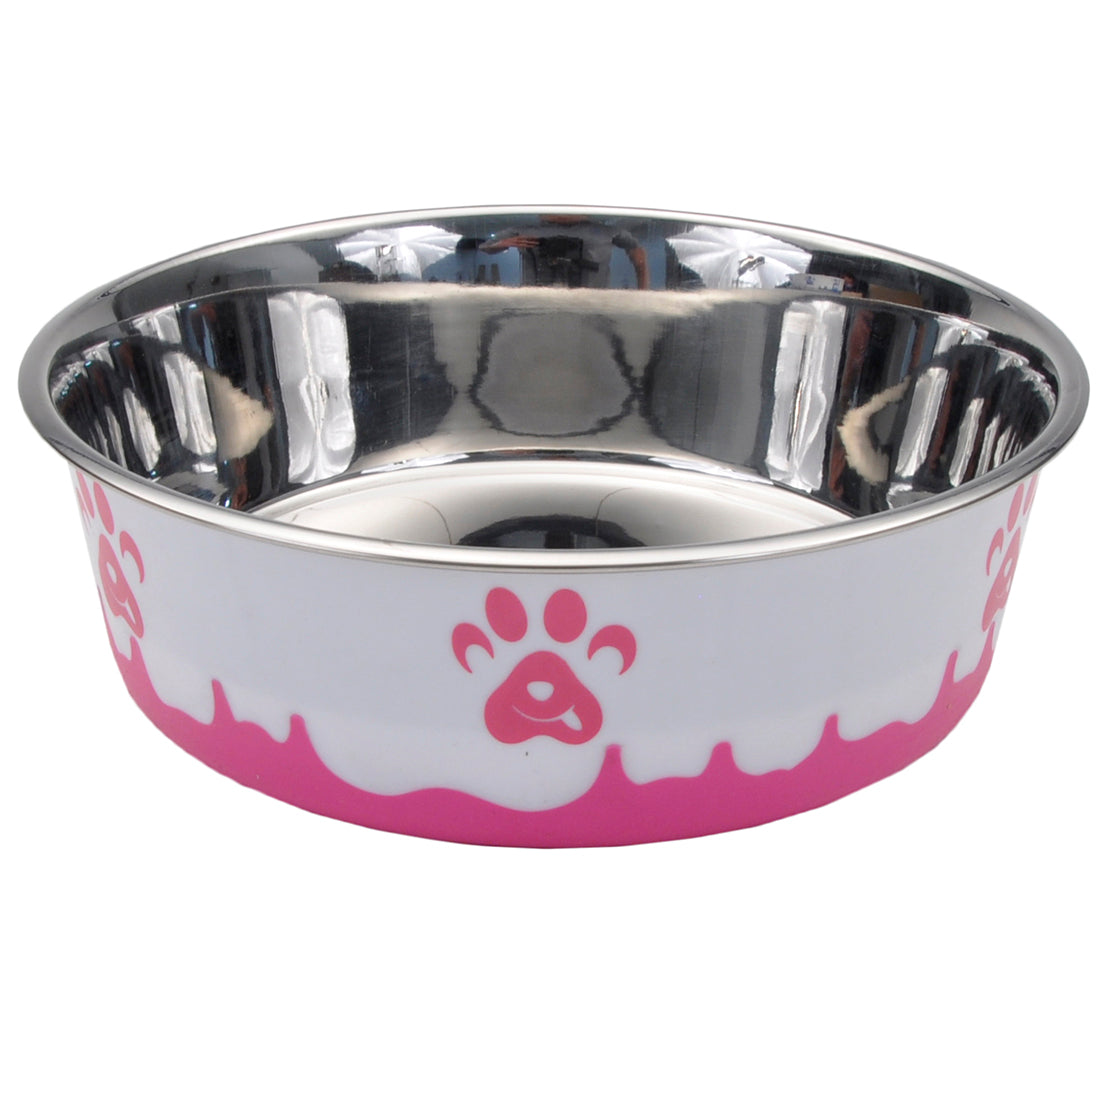 Non-Skid Paw Design Dog Bowls by Maslow, Pink